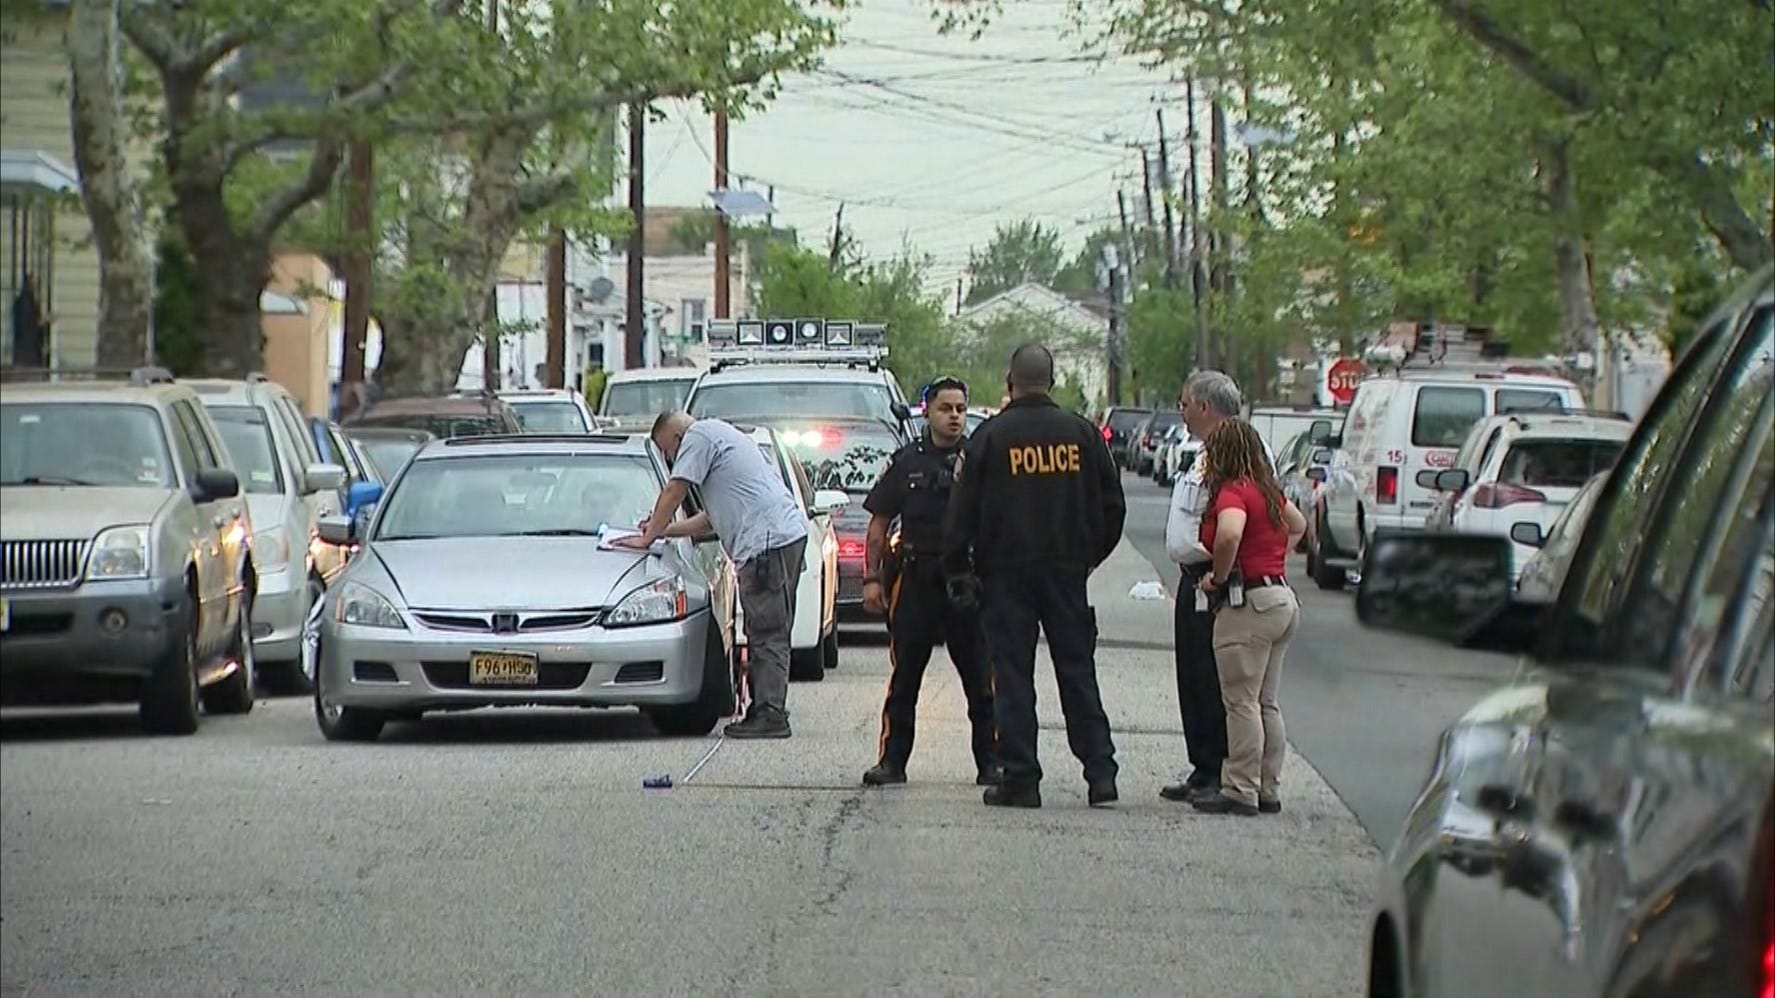 Police 2yearold child struck by car in Perth Amboy